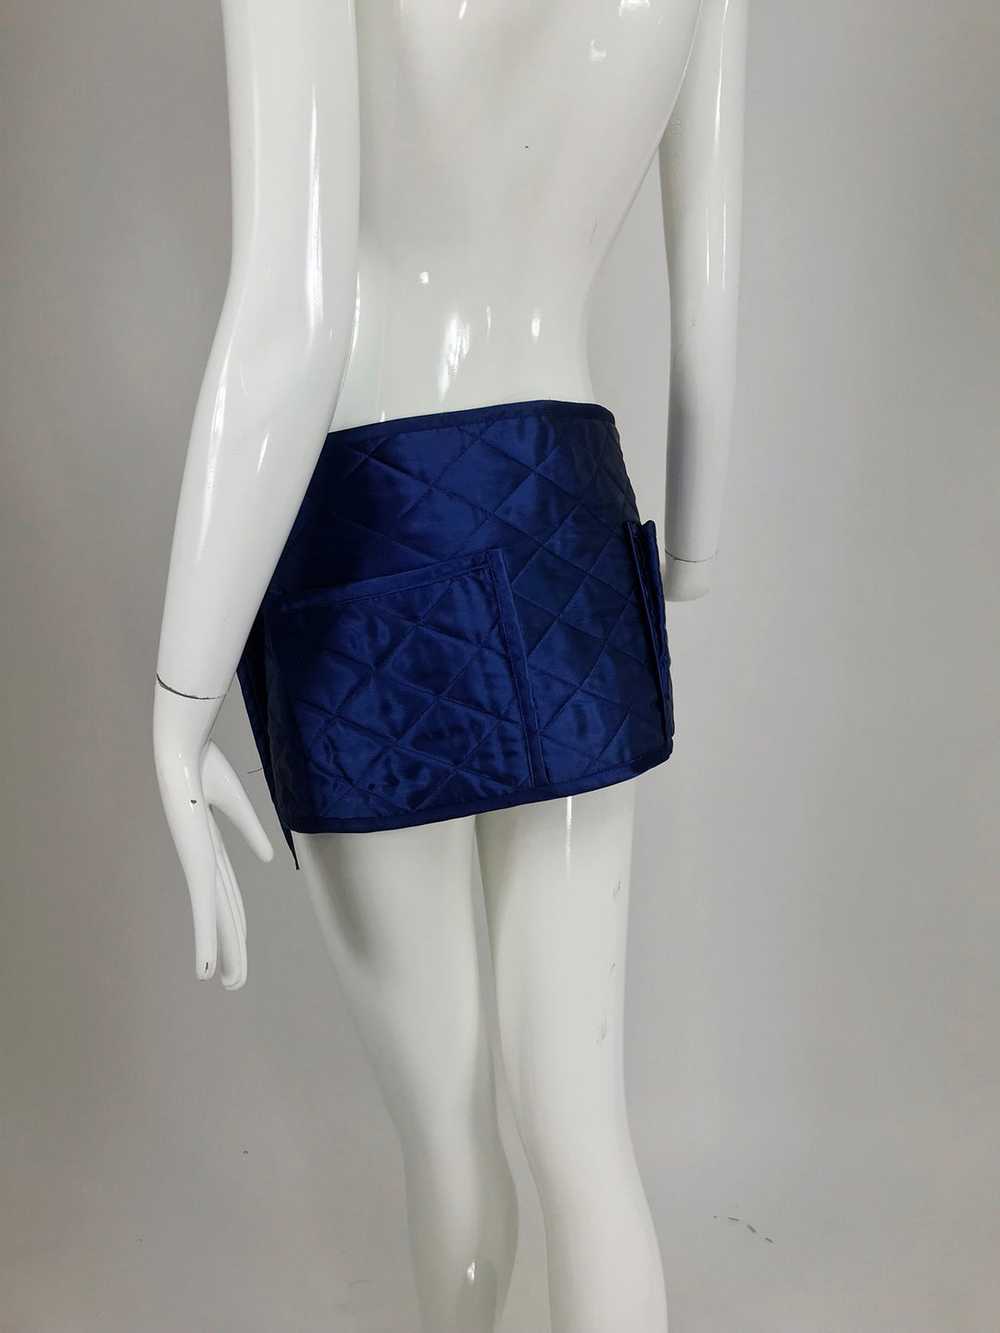 Sonia Rykiel quilted blue satin belt or skirt wit… - image 7